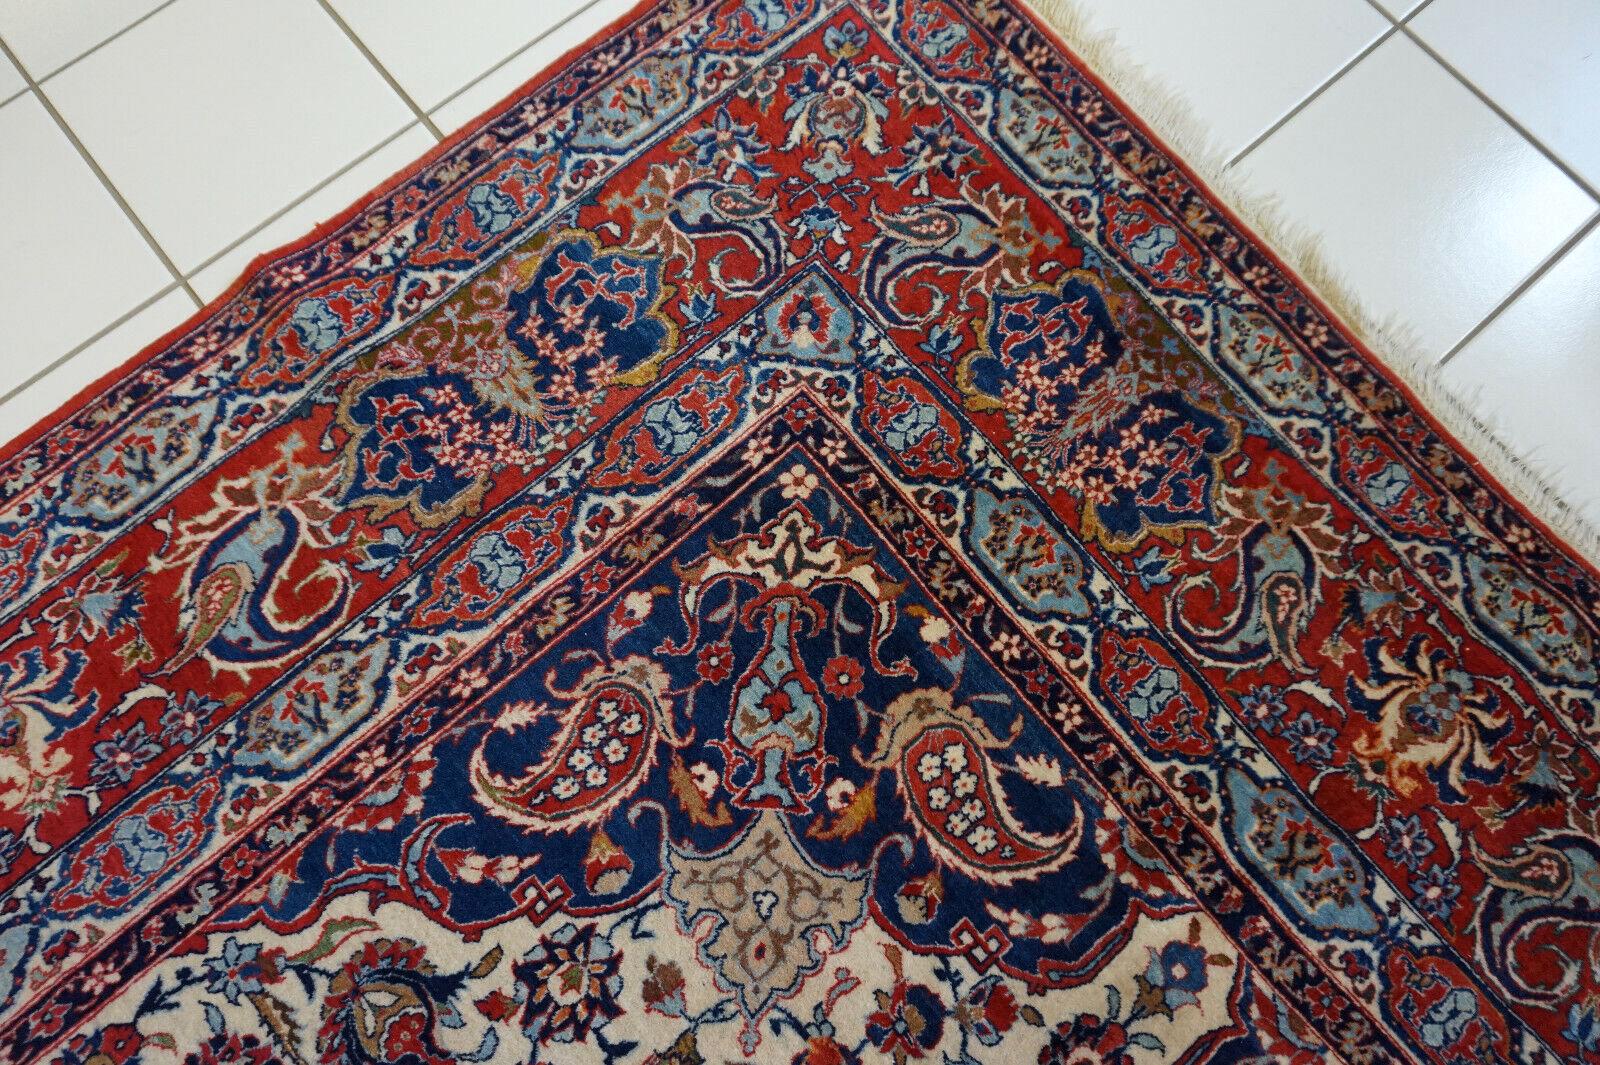 Handmade Antique Persian Style Isfahan Rug 4.5' x 7.7', 1920s - 1D53 For Sale 1